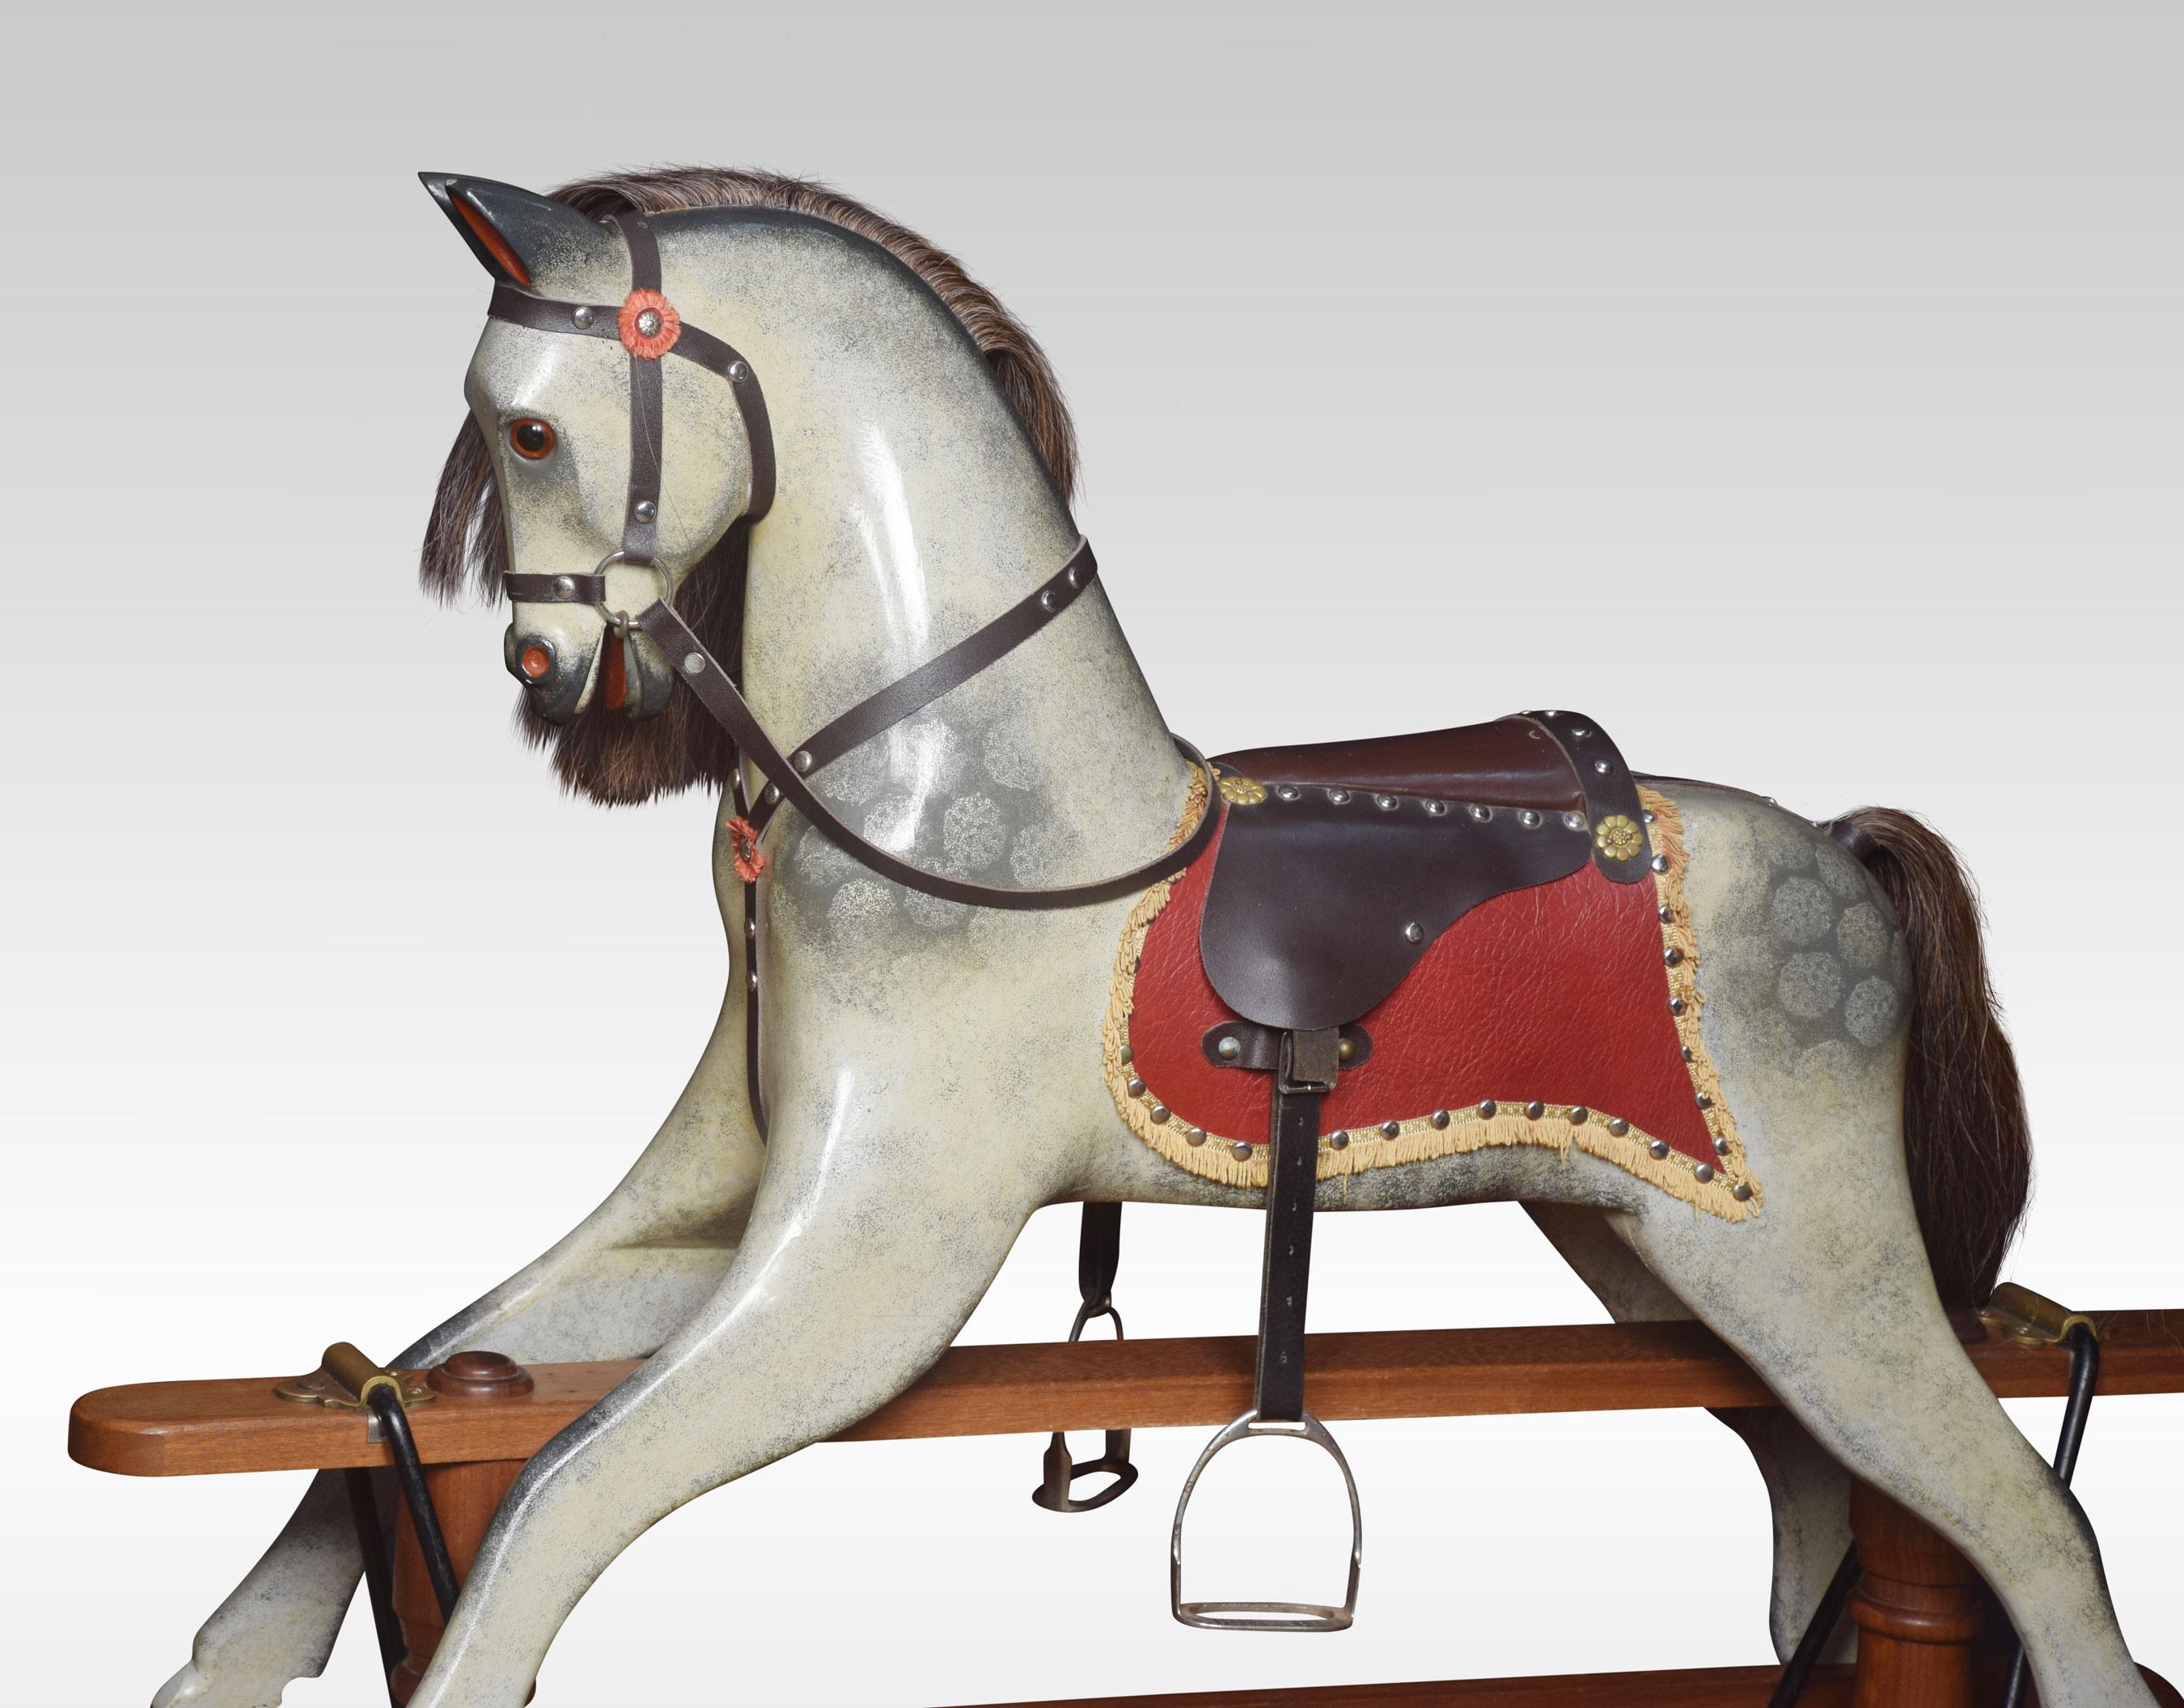 Carved and painted pine rocking horse with leather saddle and harness on trestle rocker.

Dimensions
Height 47 inches
Width 66 inches
Depth 19 inches.